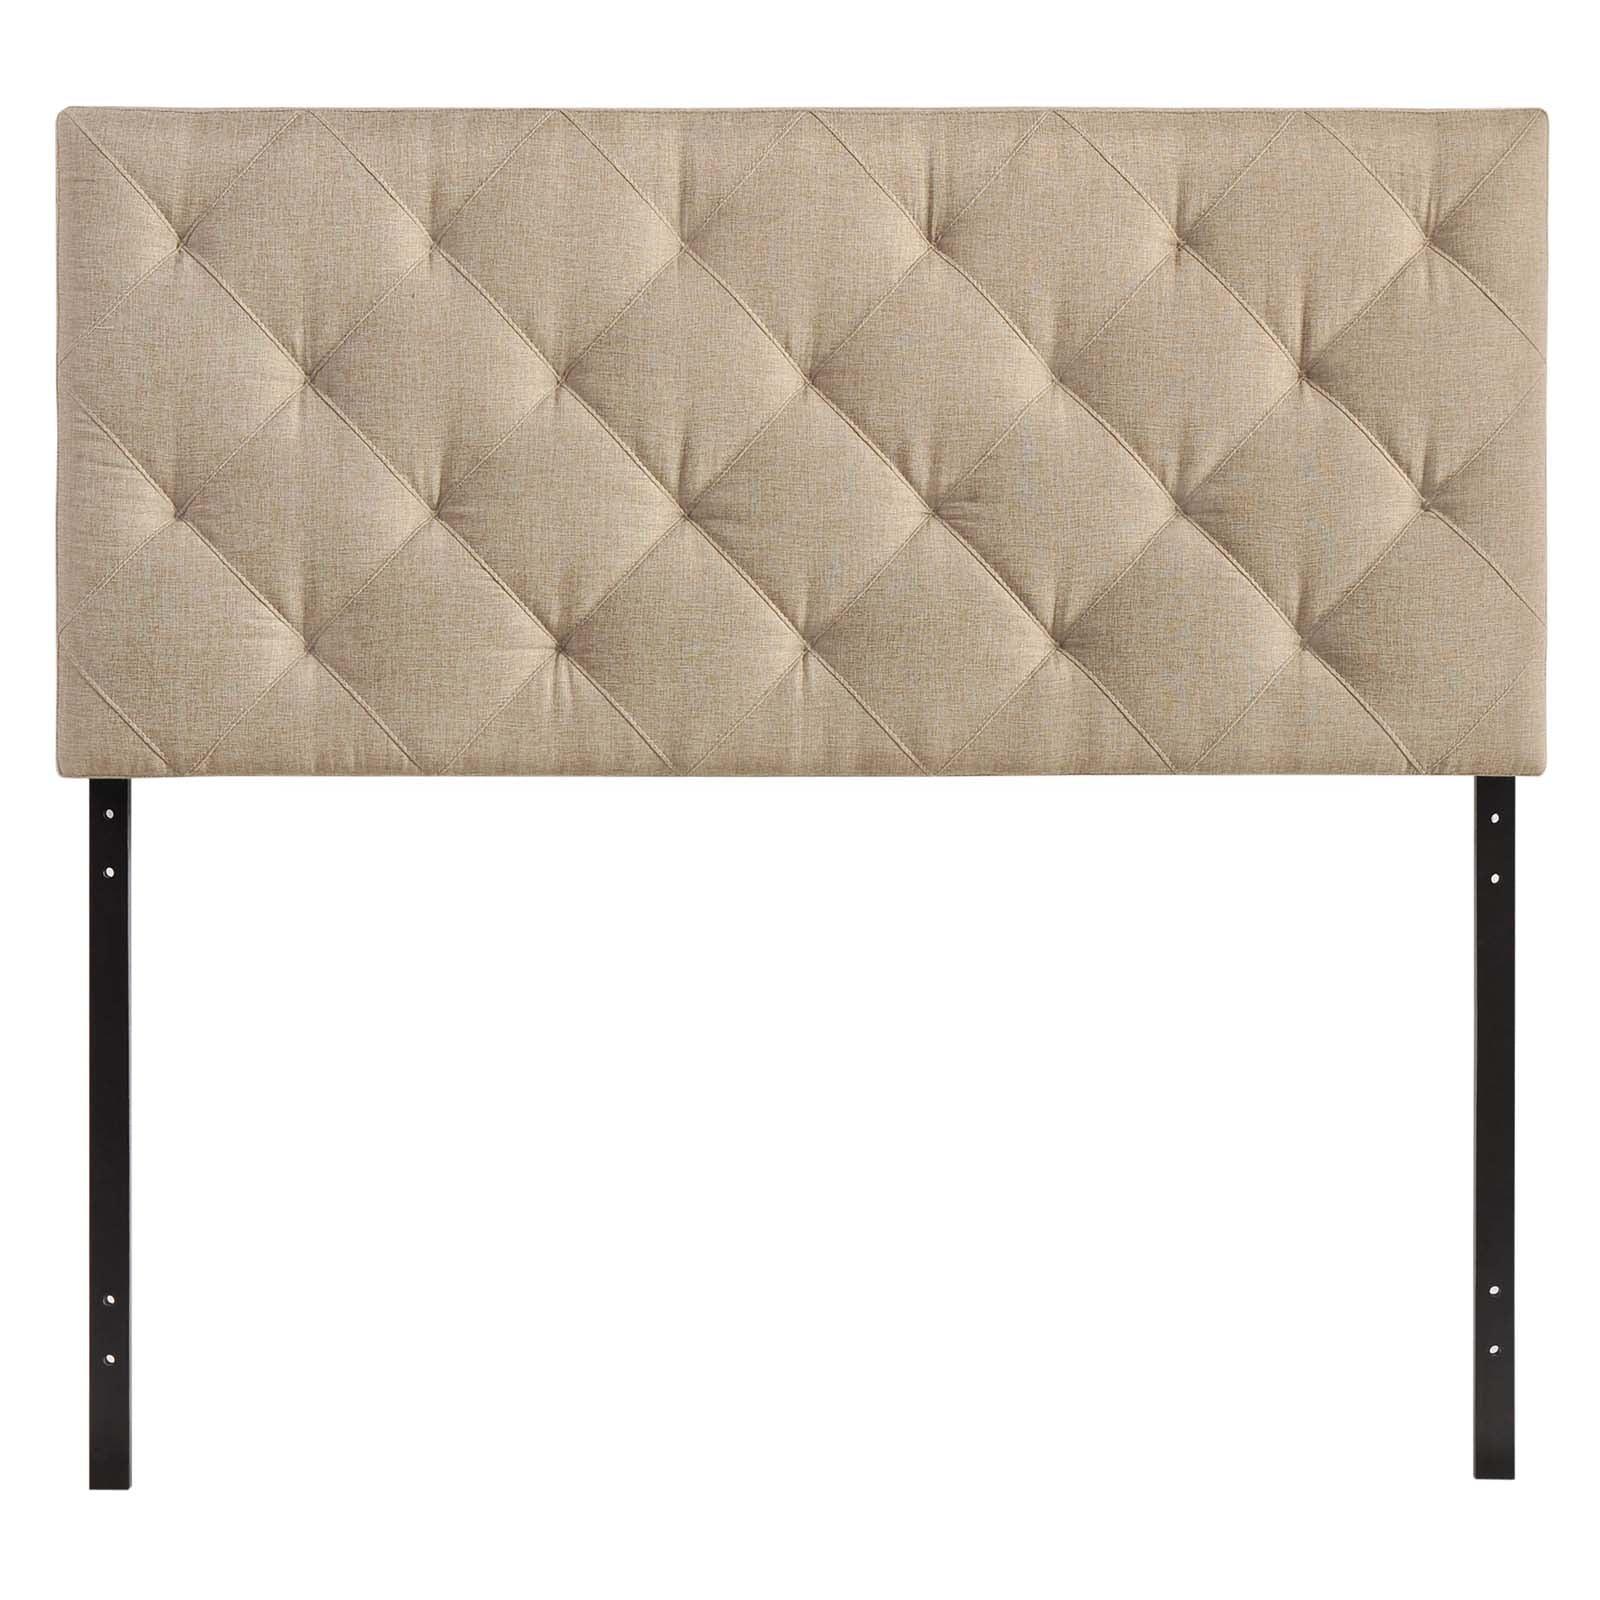 Modway Theodore Queen Upholstered Fabric Headboard FredCo